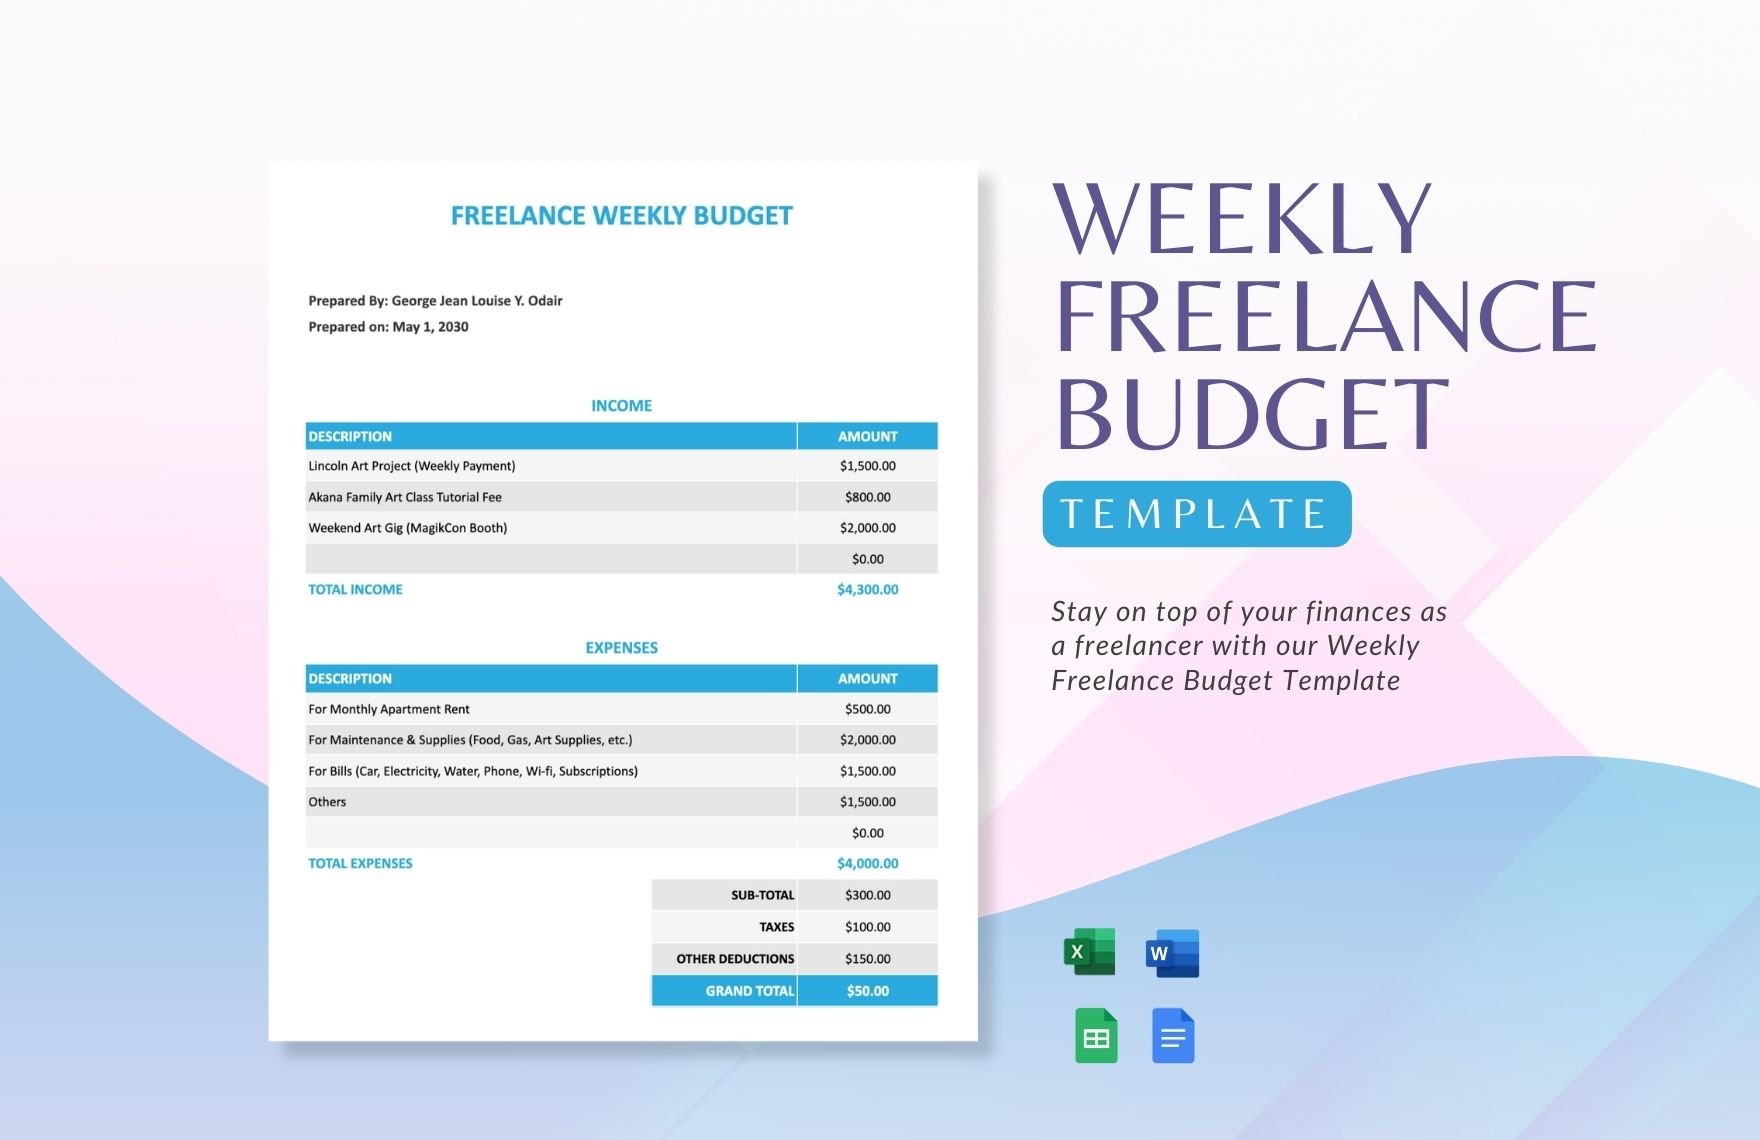 Free Weekly Freelance Budget Template in Word, Google Docs, Excel, Google Sheets